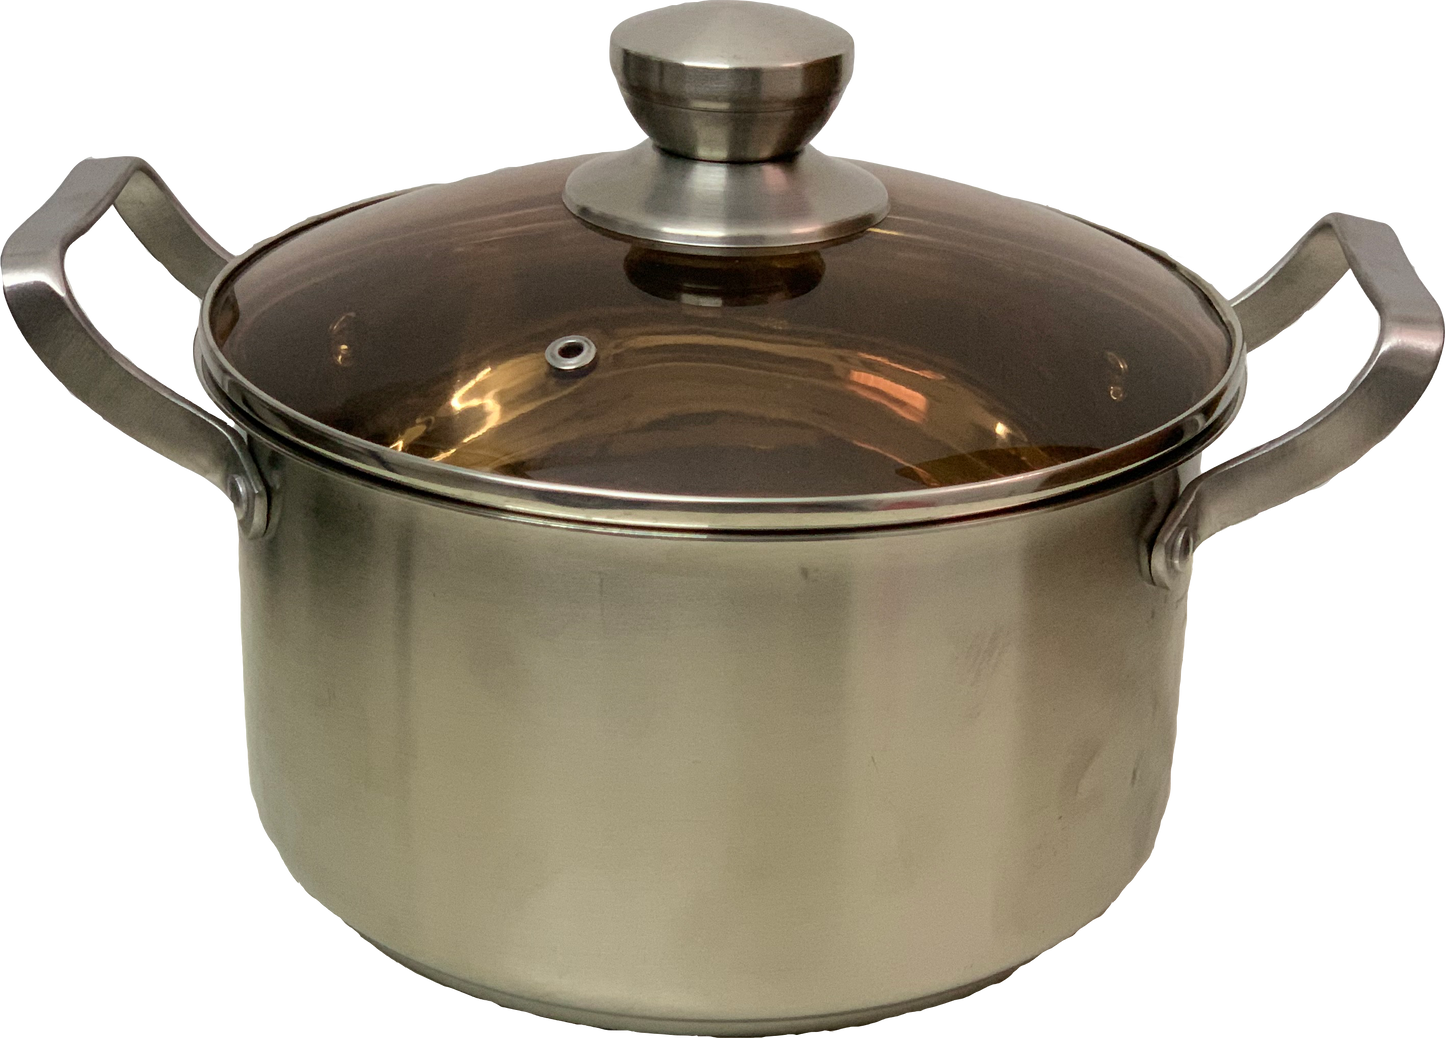 AKEBONNO SOUP POT SERIES DOUBLE STAINLESS HANDLE WITH GLASS UD